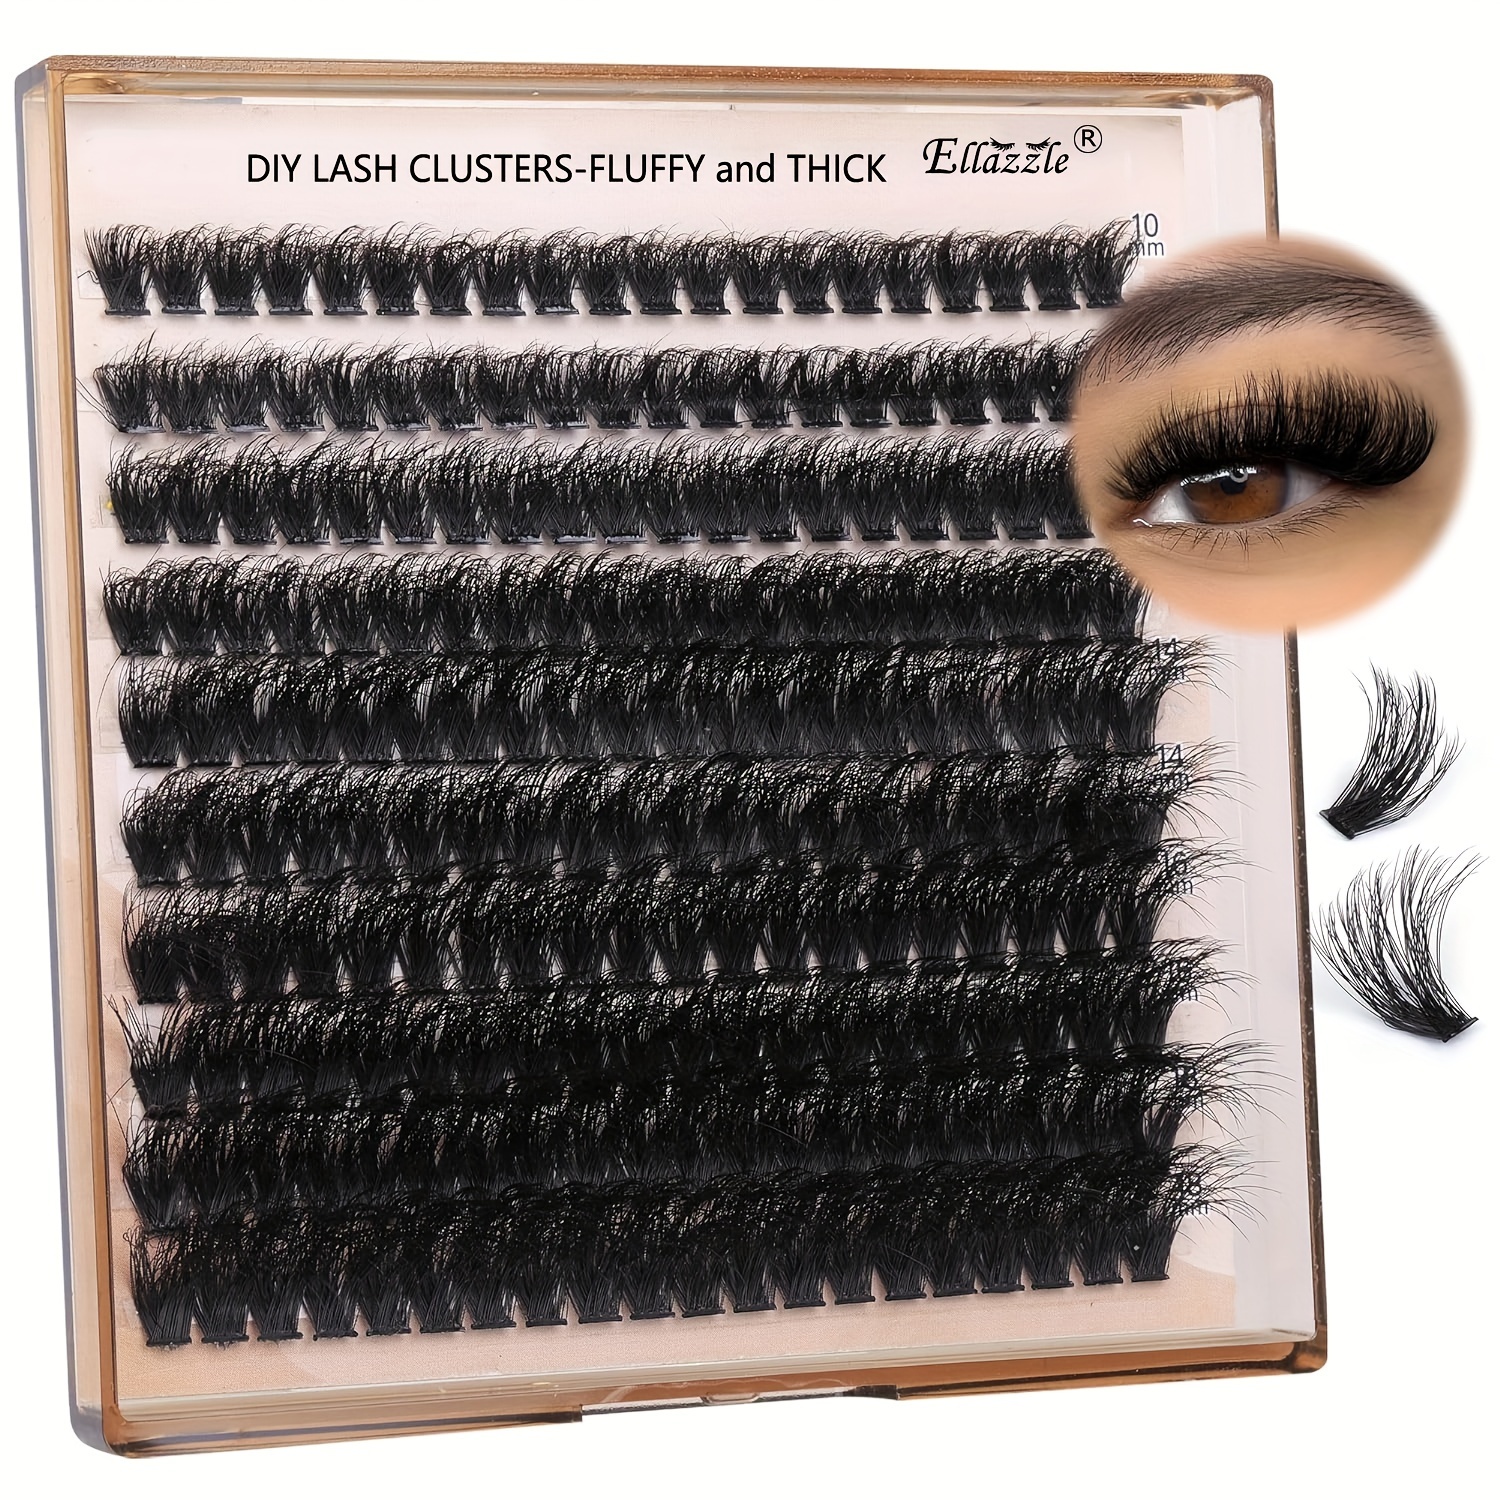 

Ellazzle Fluffy & Thick Diy Lash Clusters - D , 10-18mm Mix, Wispy Individual Eyelash Extensions For Beginners, Reusable